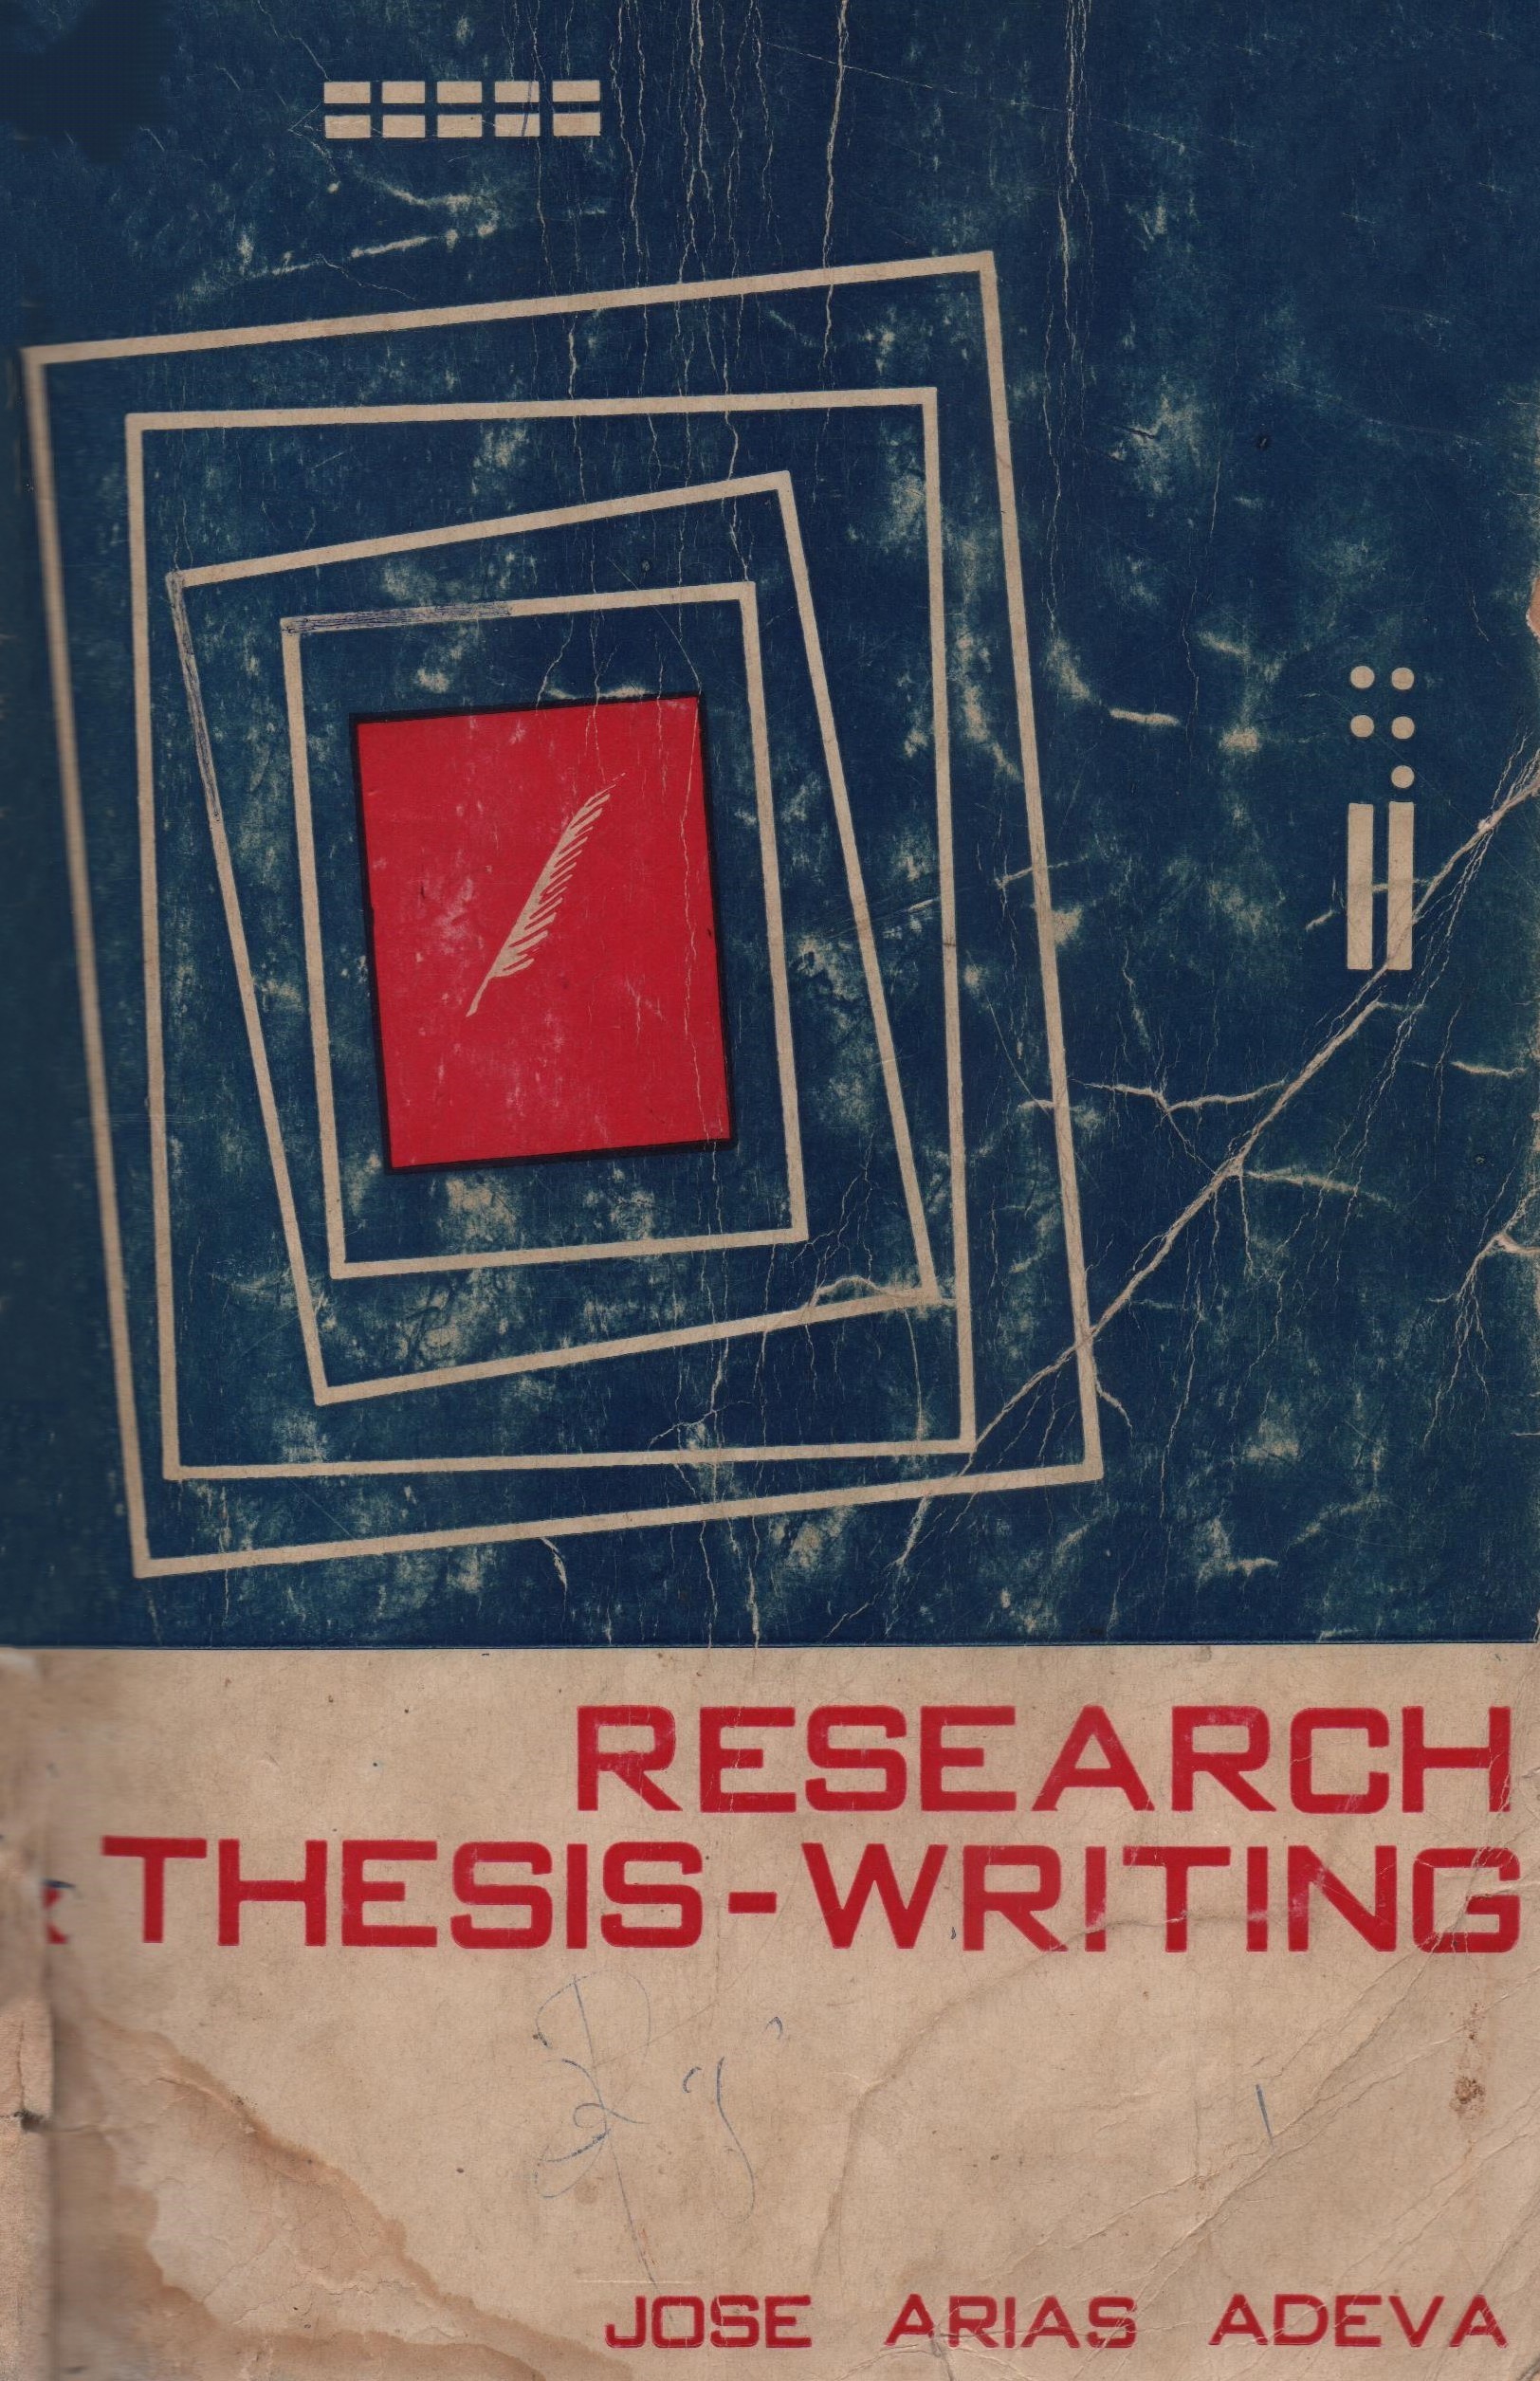 Research and thesis-writing